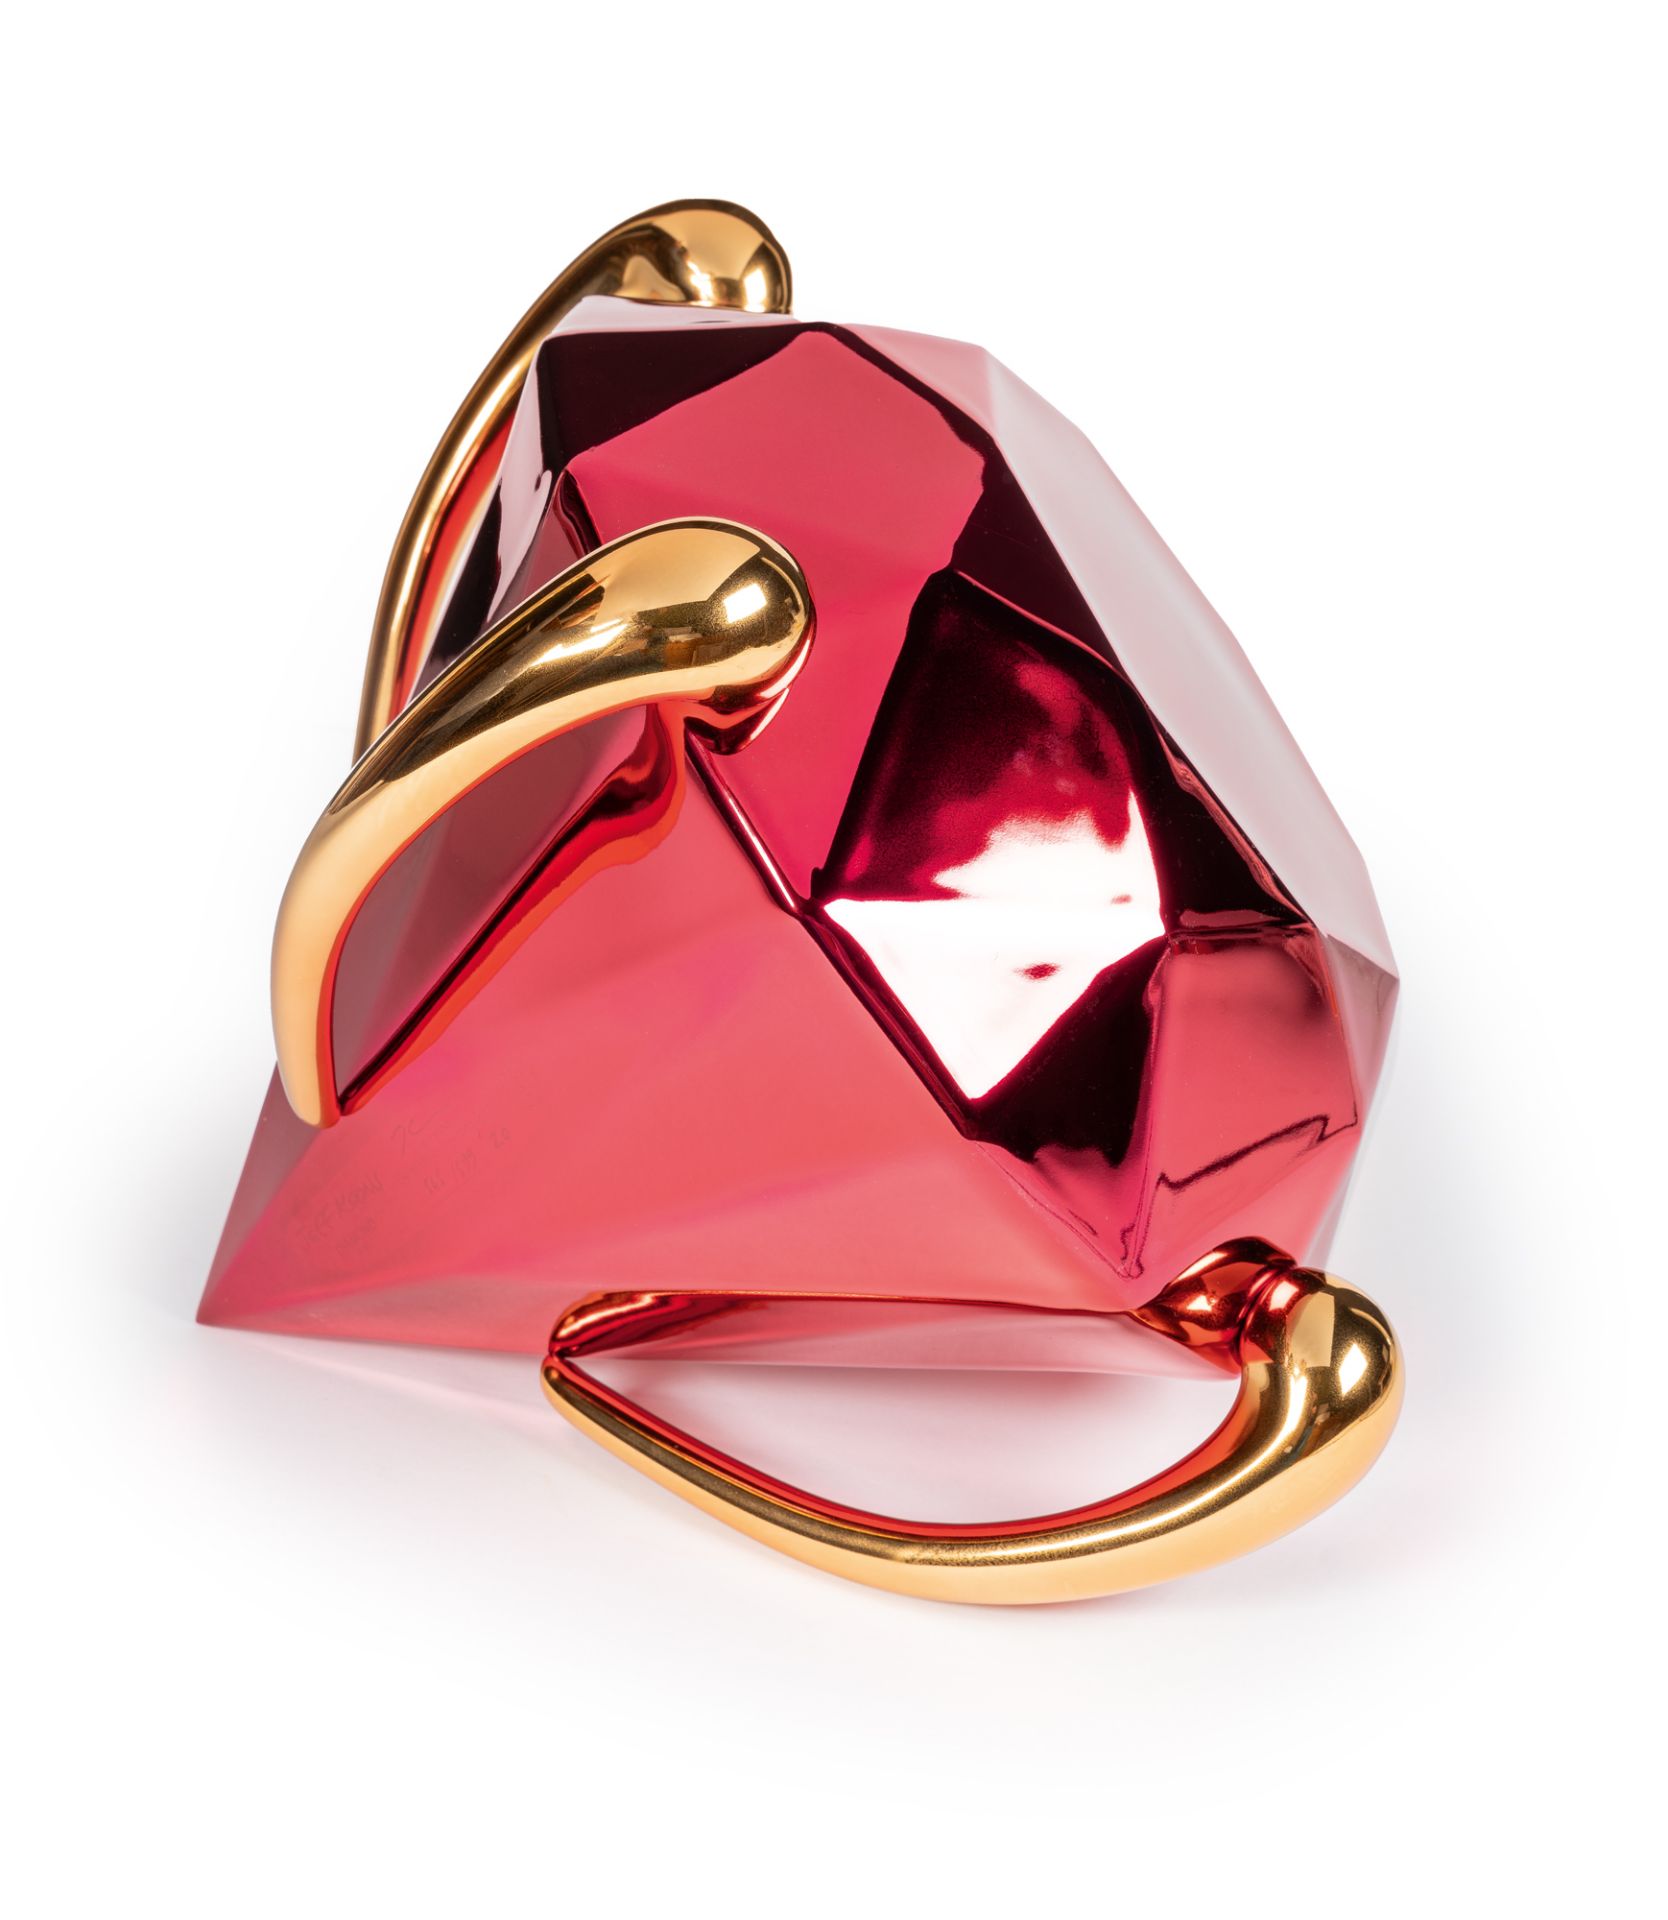 Jeff Koons, Diamond (red).Porcelain with chromatic coating. (2020). Ca. 32.5 x 39 x 32 cm. A